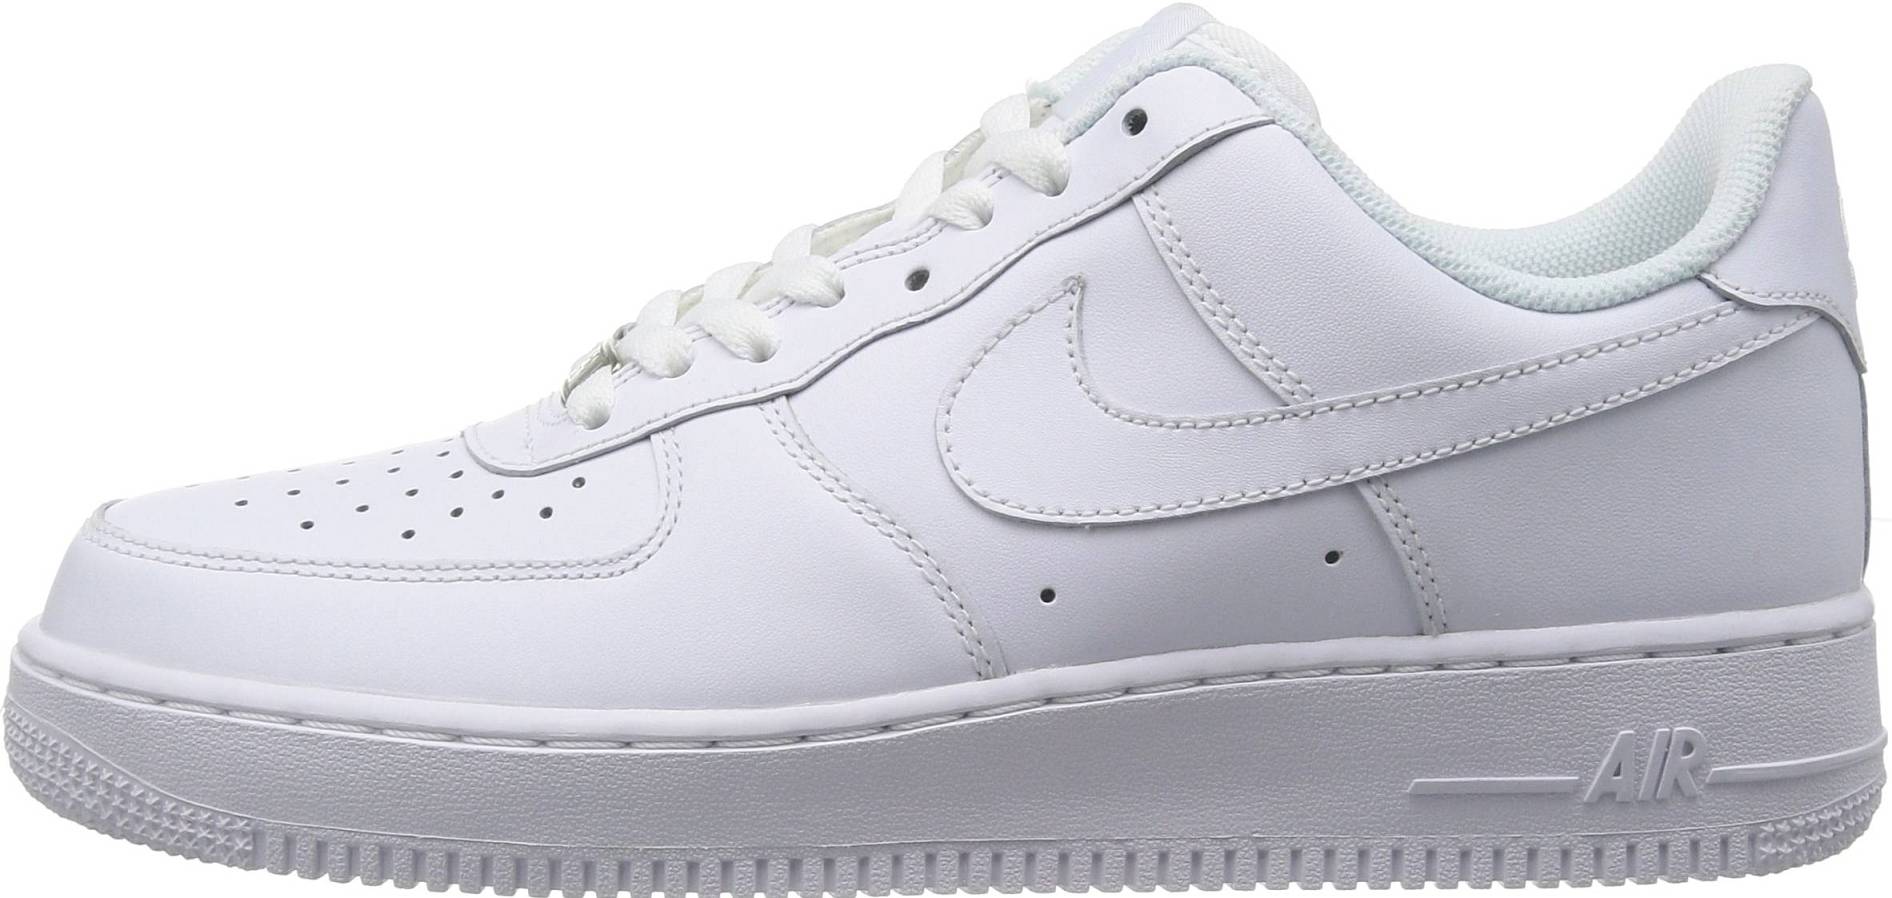 Nike Air Force 1 07 – Shoes Reviews & Reasons To Buy